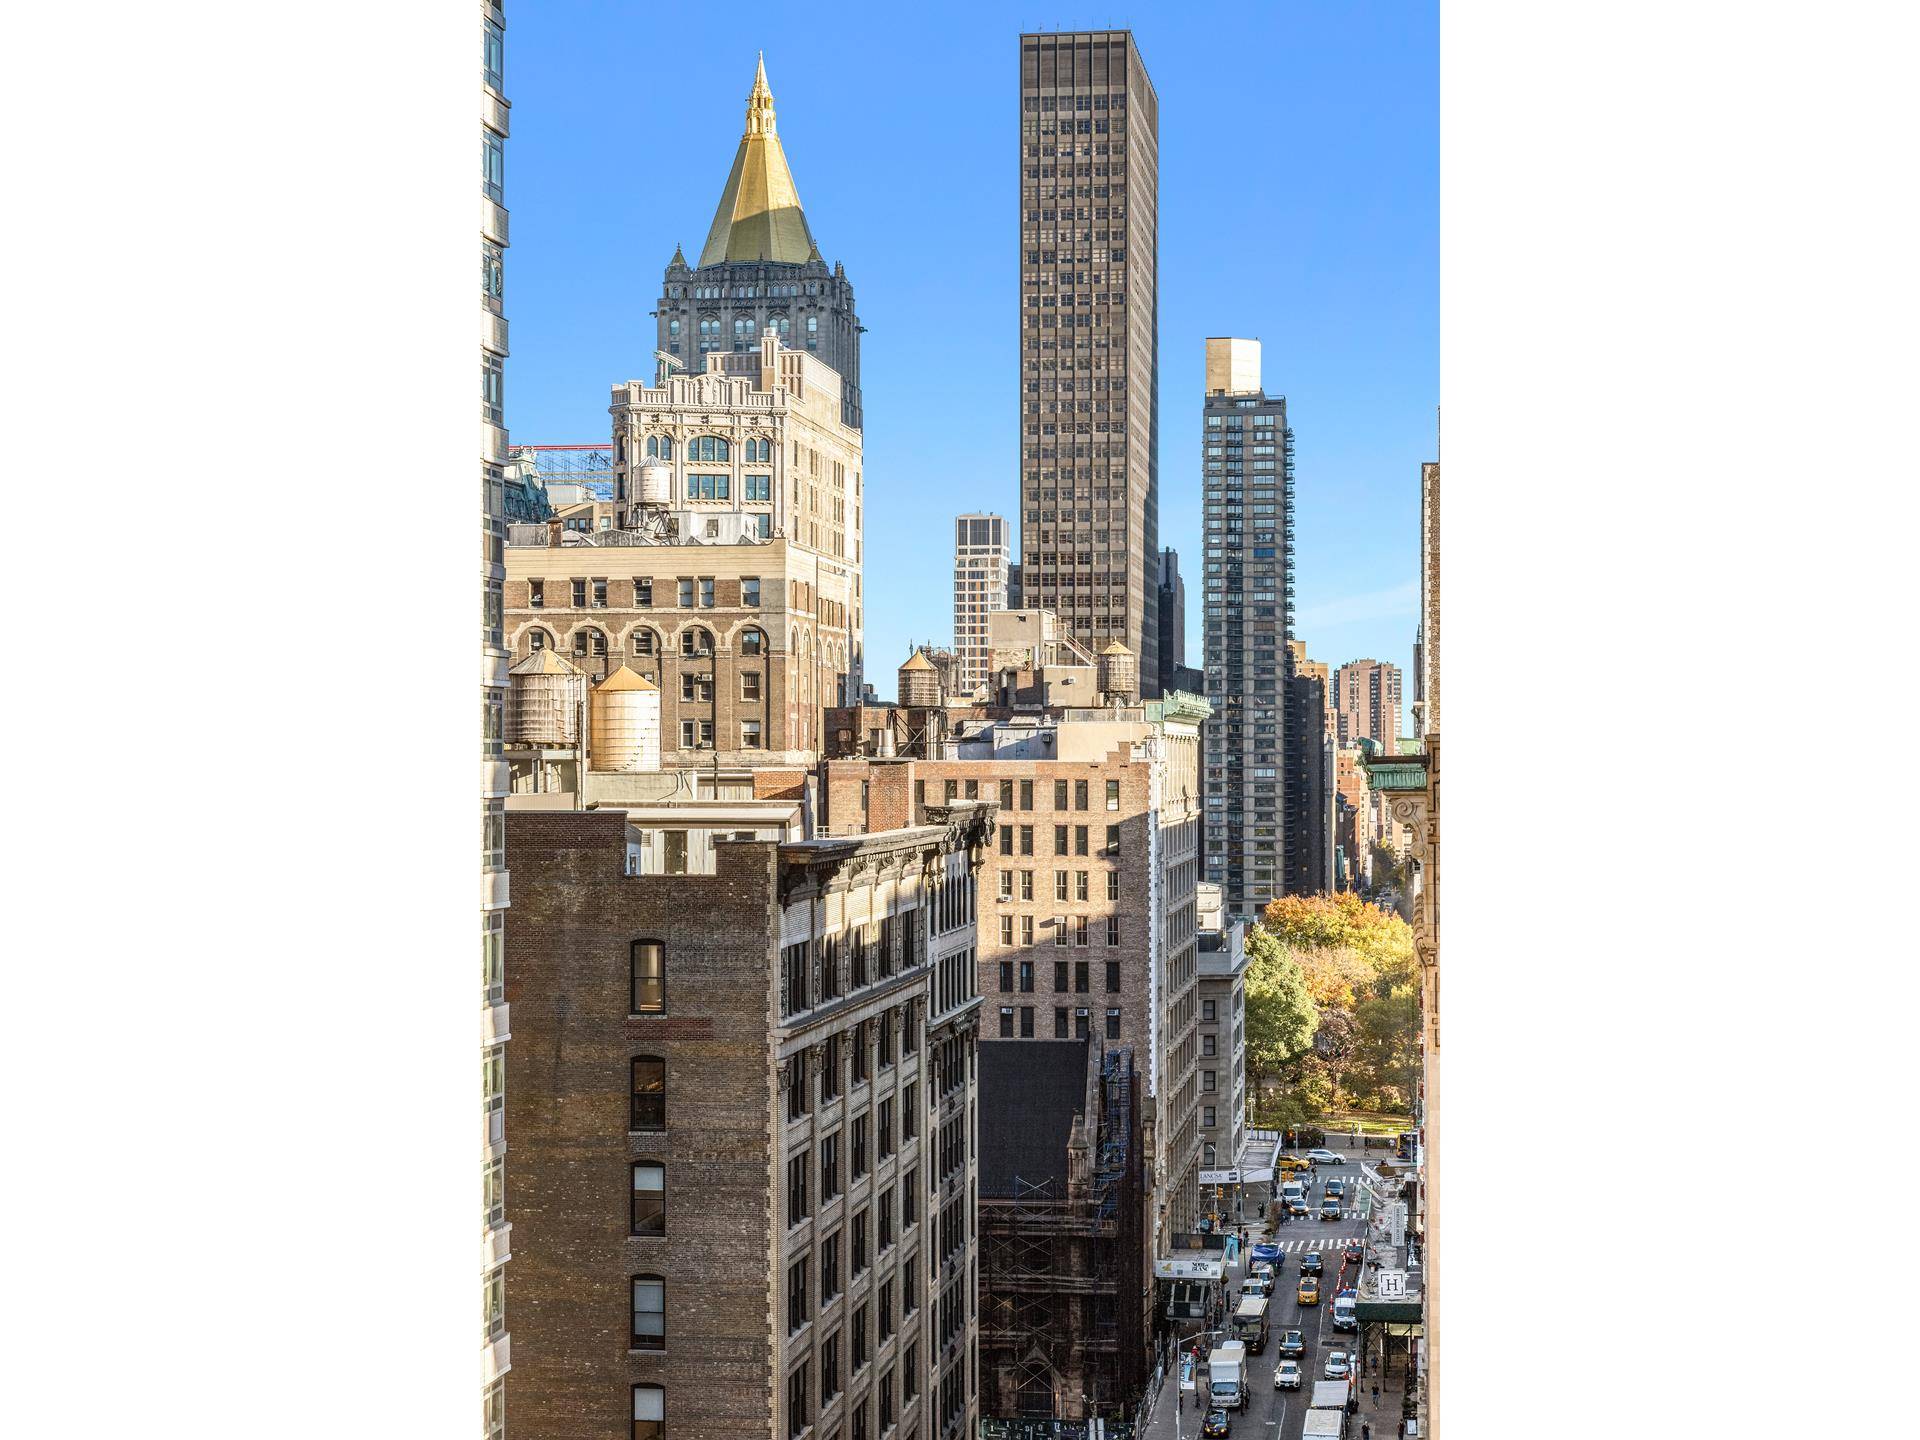 Introducing the Penthouse at 110 W 25th Street A truly rare opportunity to own a triple mint full floor penthouse loft in prime Chelsea, full of character, tremendous light, privacy ...